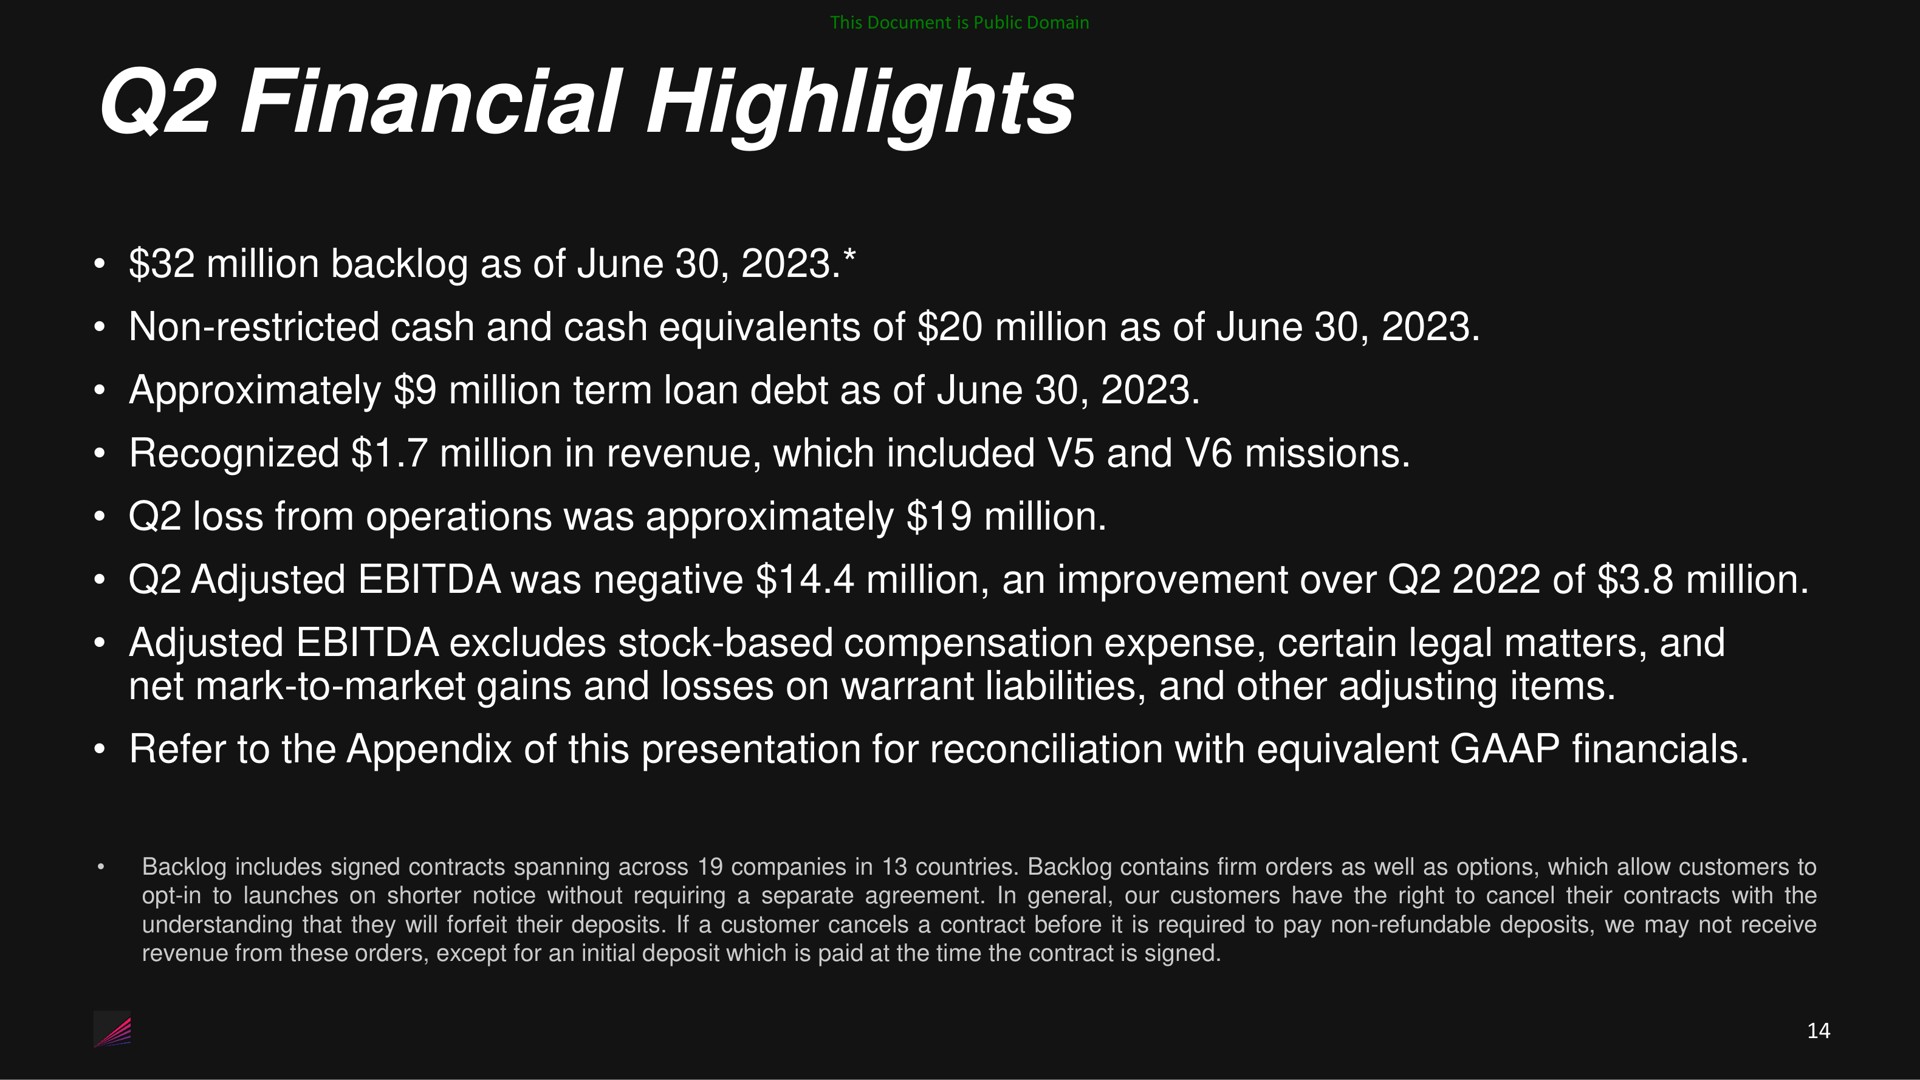 financial highlights million backlog as of june non restricted cash and cash equivalents of million as of june approximately million term loan debt as of june recognized million in revenue which included and missions loss from operations was approximately million adjusted was negative million an improvement over of million adjusted excludes stock based compensation expense certain legal matters and net mark to market gains and losses on warrant liabilities and other adjusting items refer to the appendix of this presentation for reconciliation with equivalent | Momentus